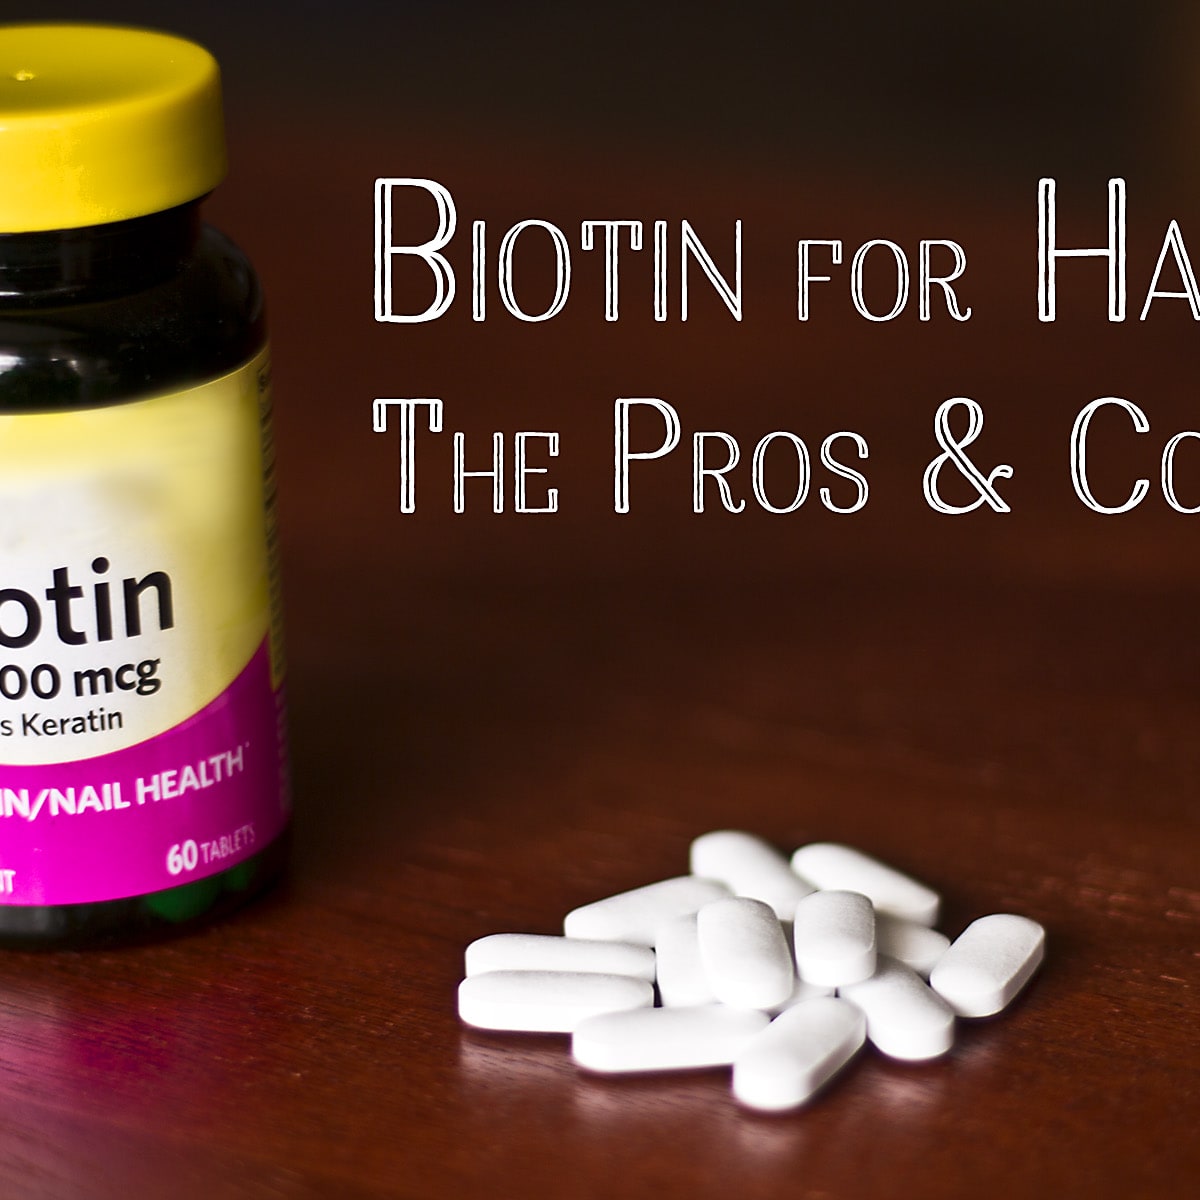 Biotin for Hair: Pros and Cons, Side Effects, and Precautions - HubPages